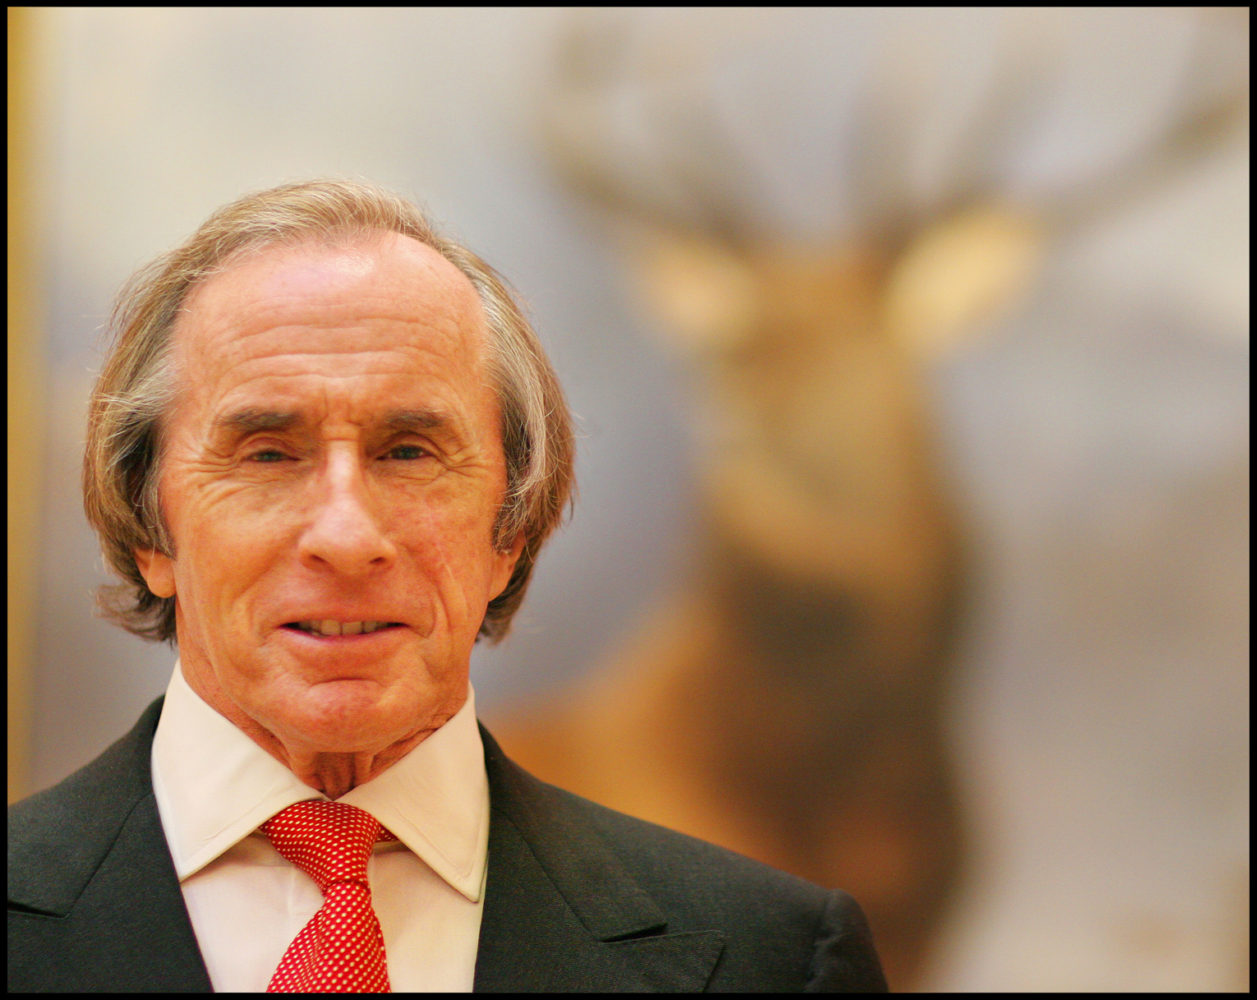 SIR JACKIE STEWART WORLD FIRST AT CONCOURS OF ELEGANCE 2015